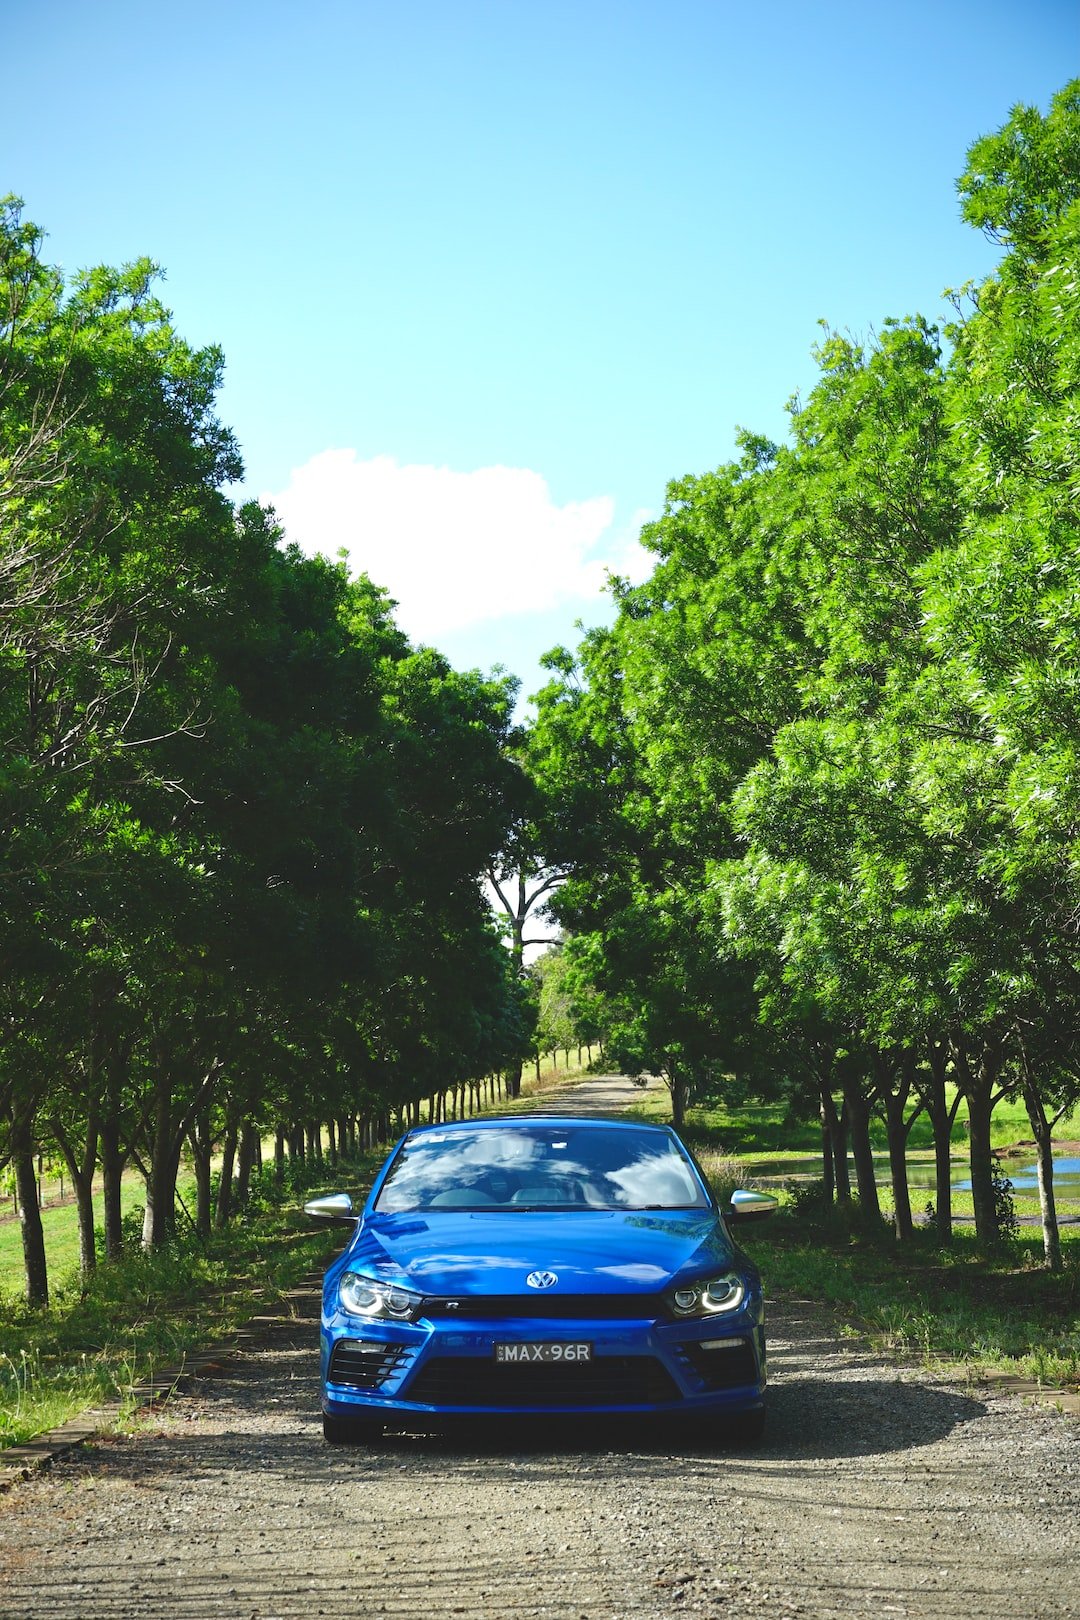 blue car parked near green trees during daytime